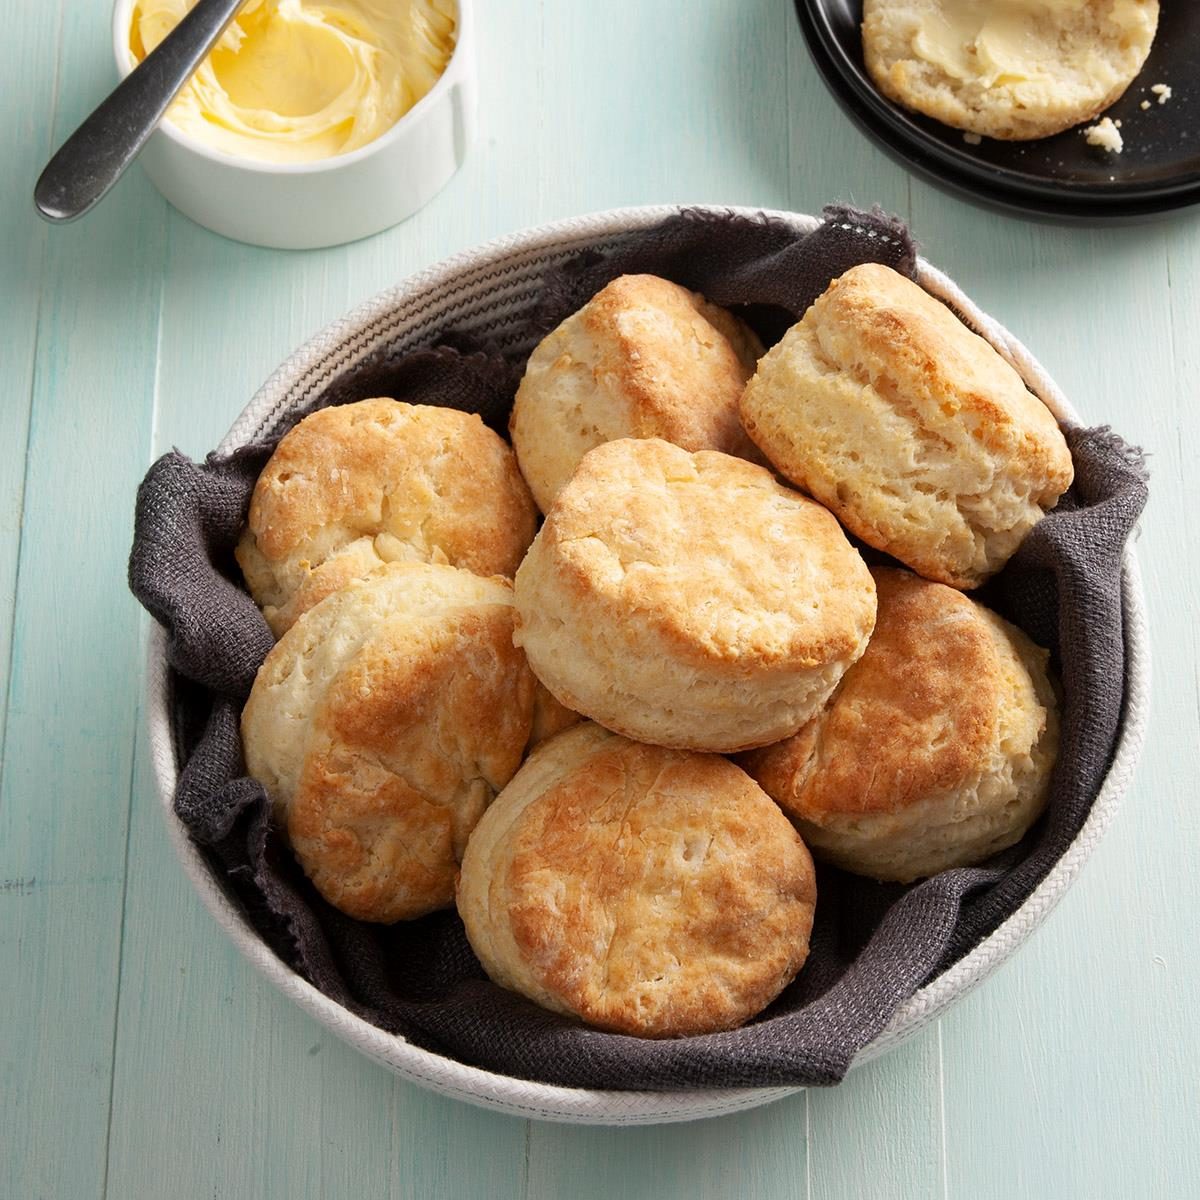 Biscuit Recipes - Buttermilk, Southern, Drop & More | Taste of Home